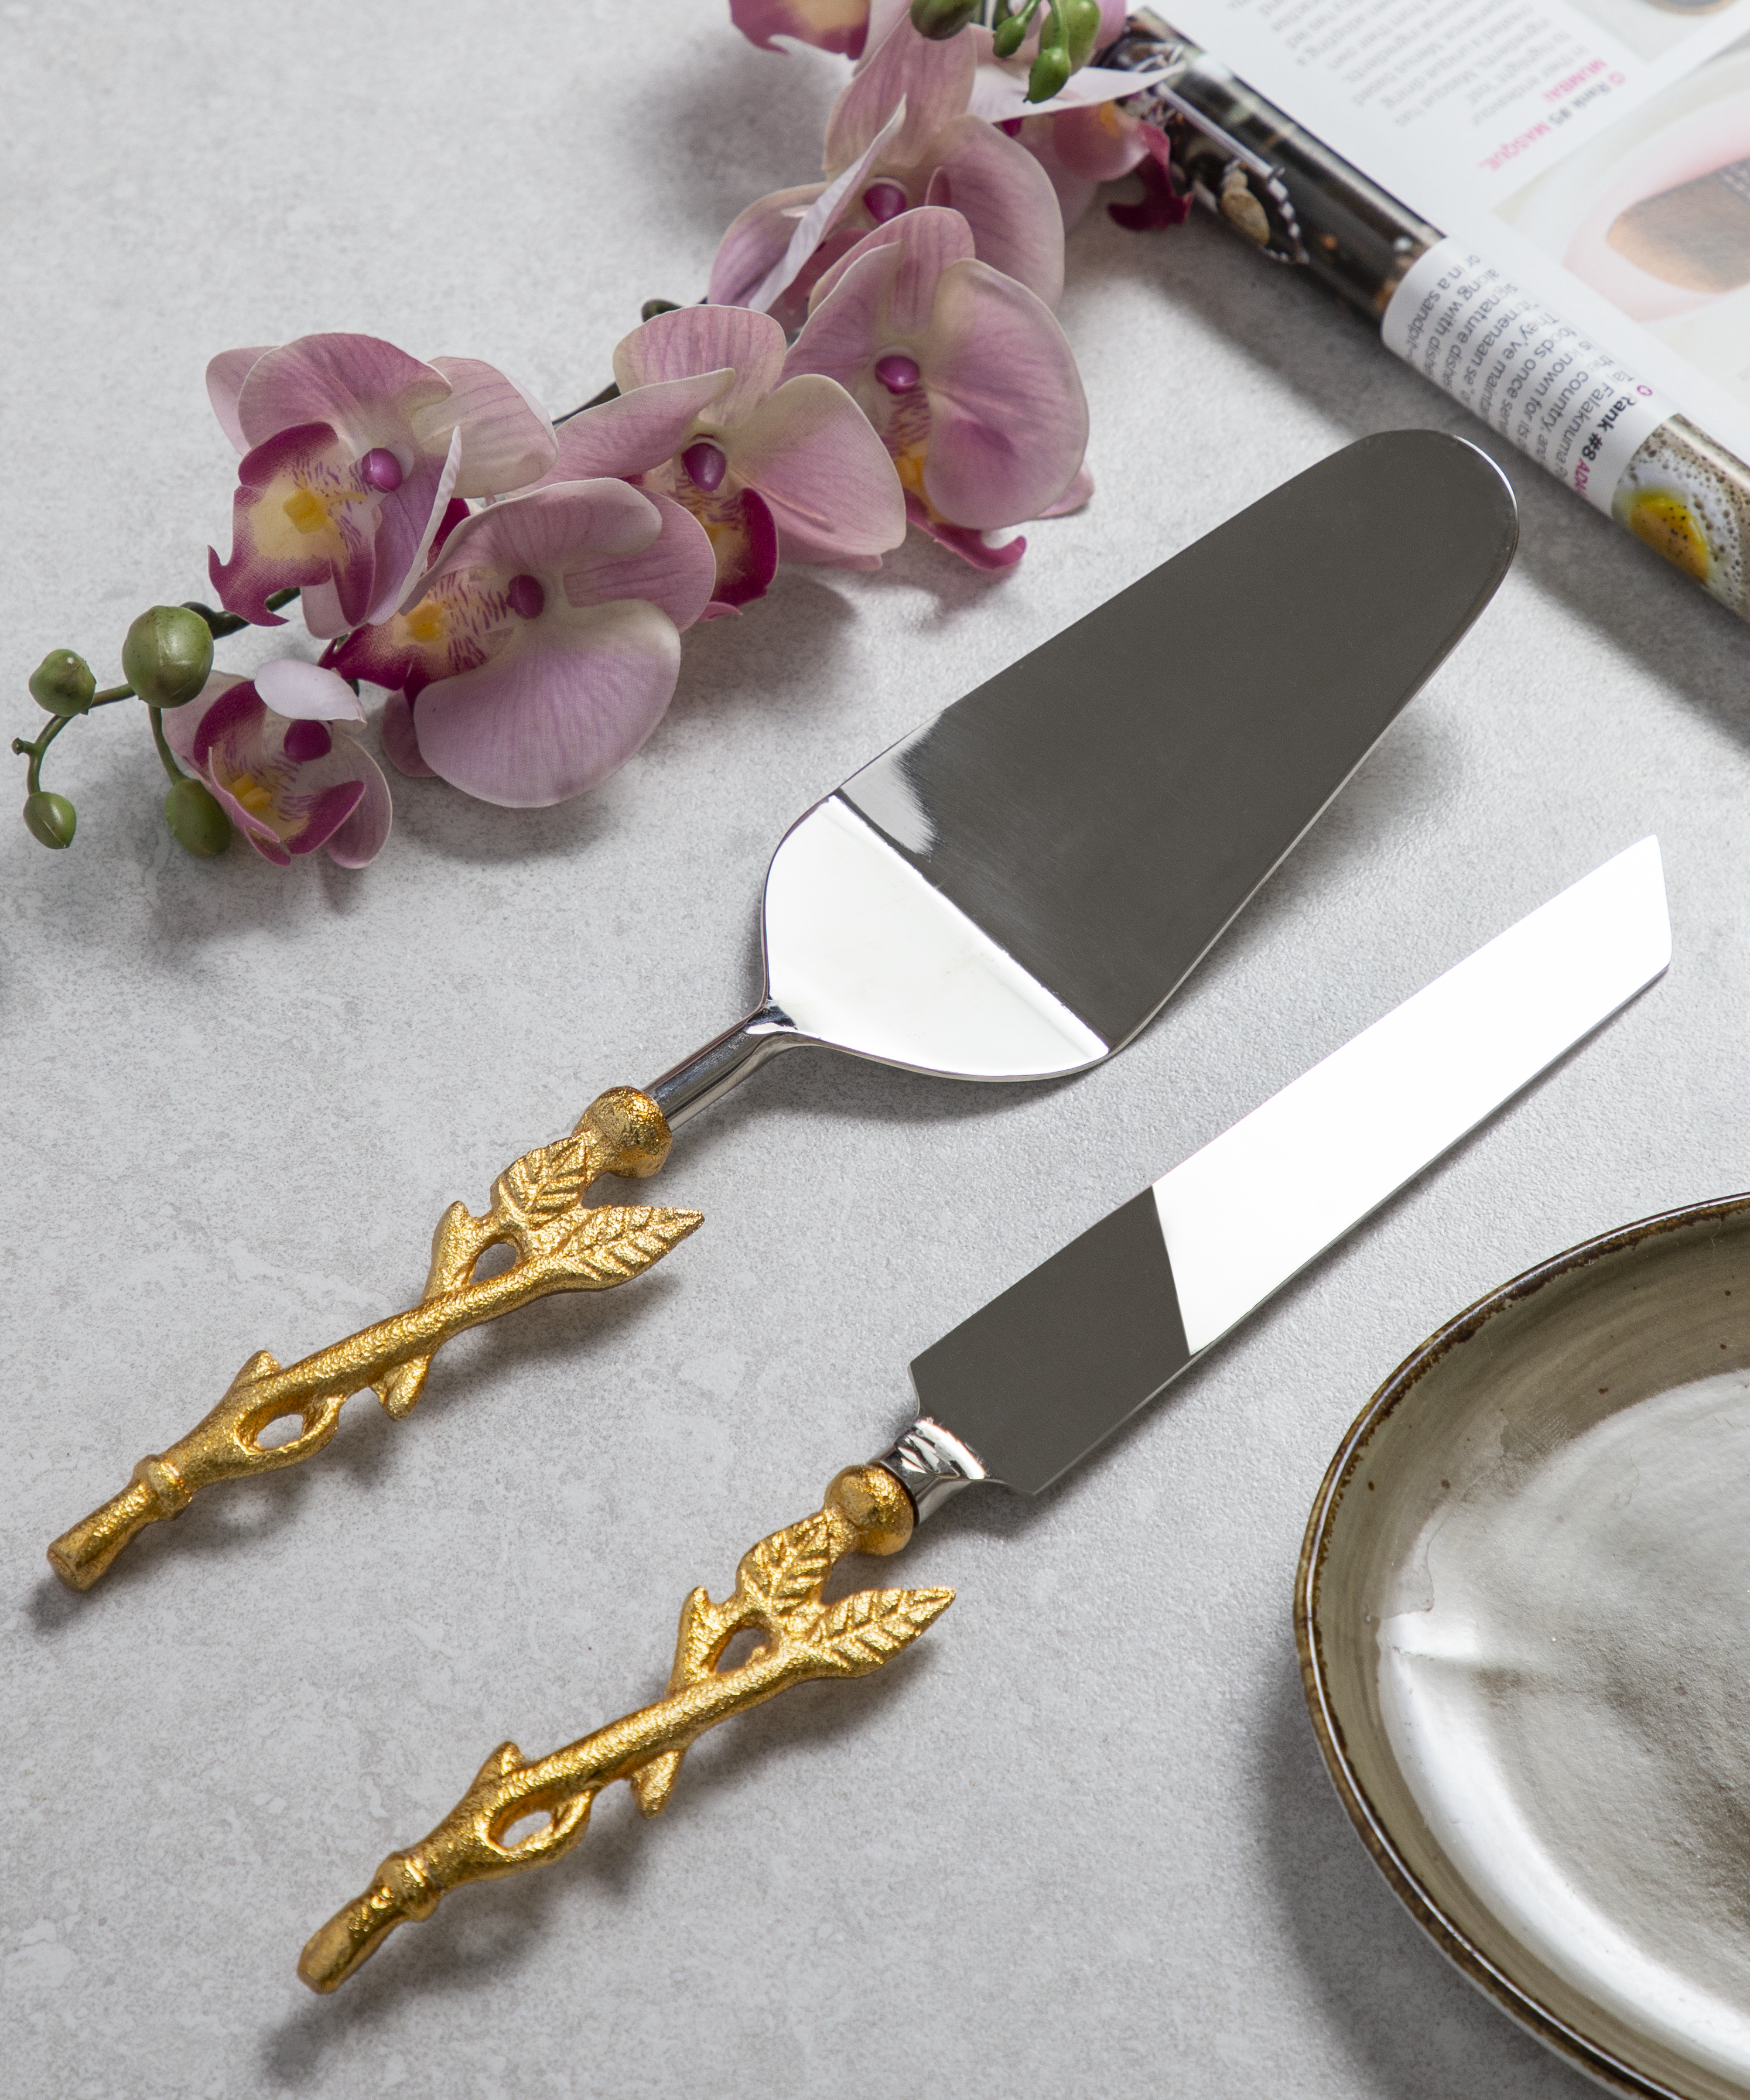 Stem With Leaves Cake Cutlery (Spatula And Knife Set)